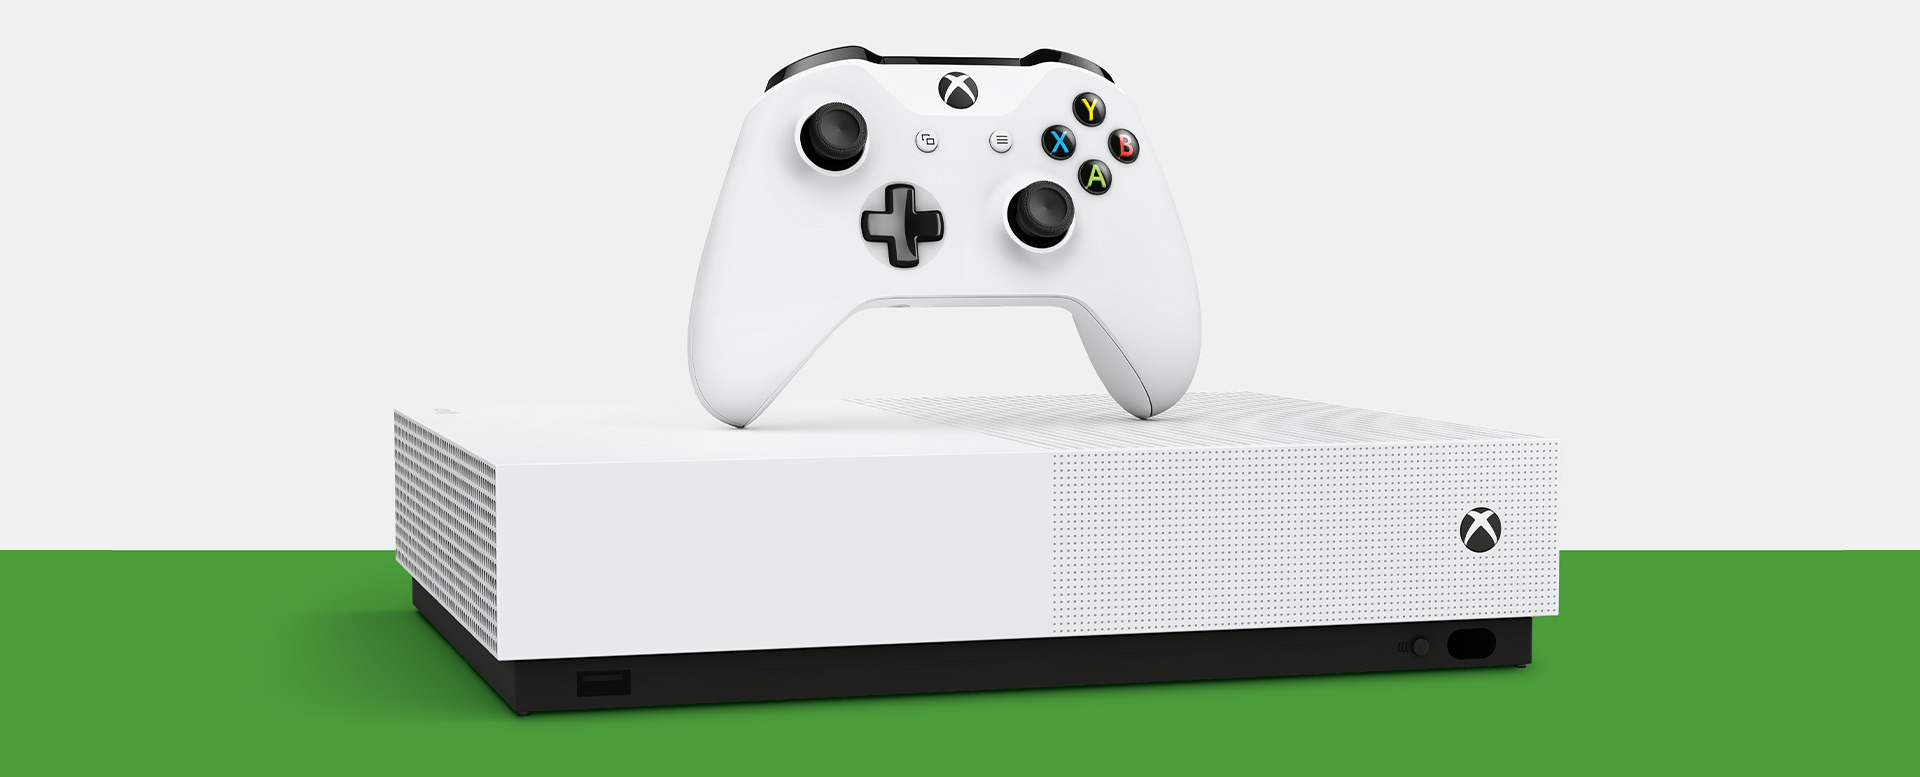 where to buy digital xbox one games